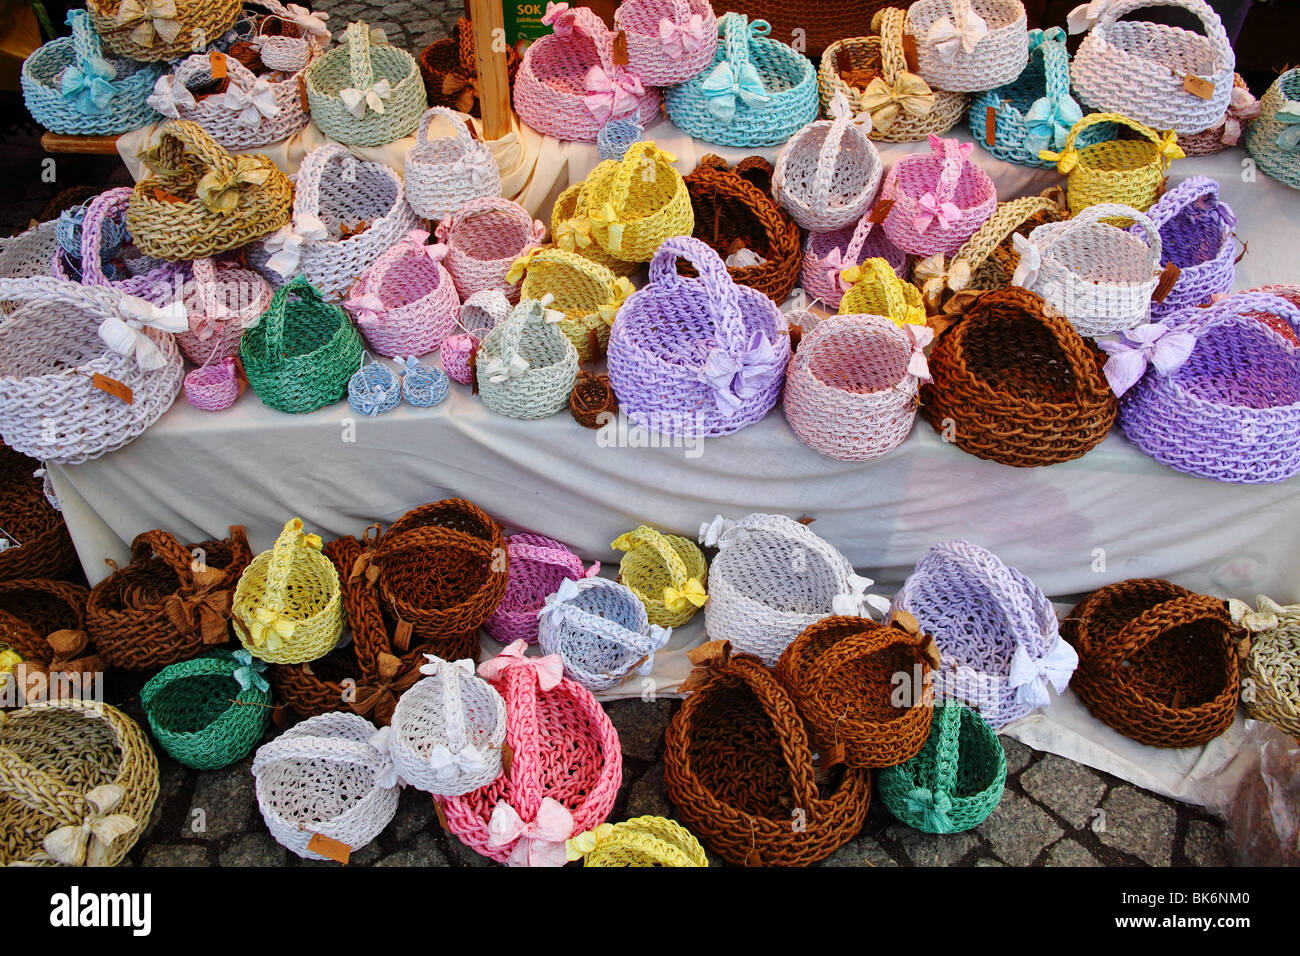 Hand made colorful baskets Stock Photo